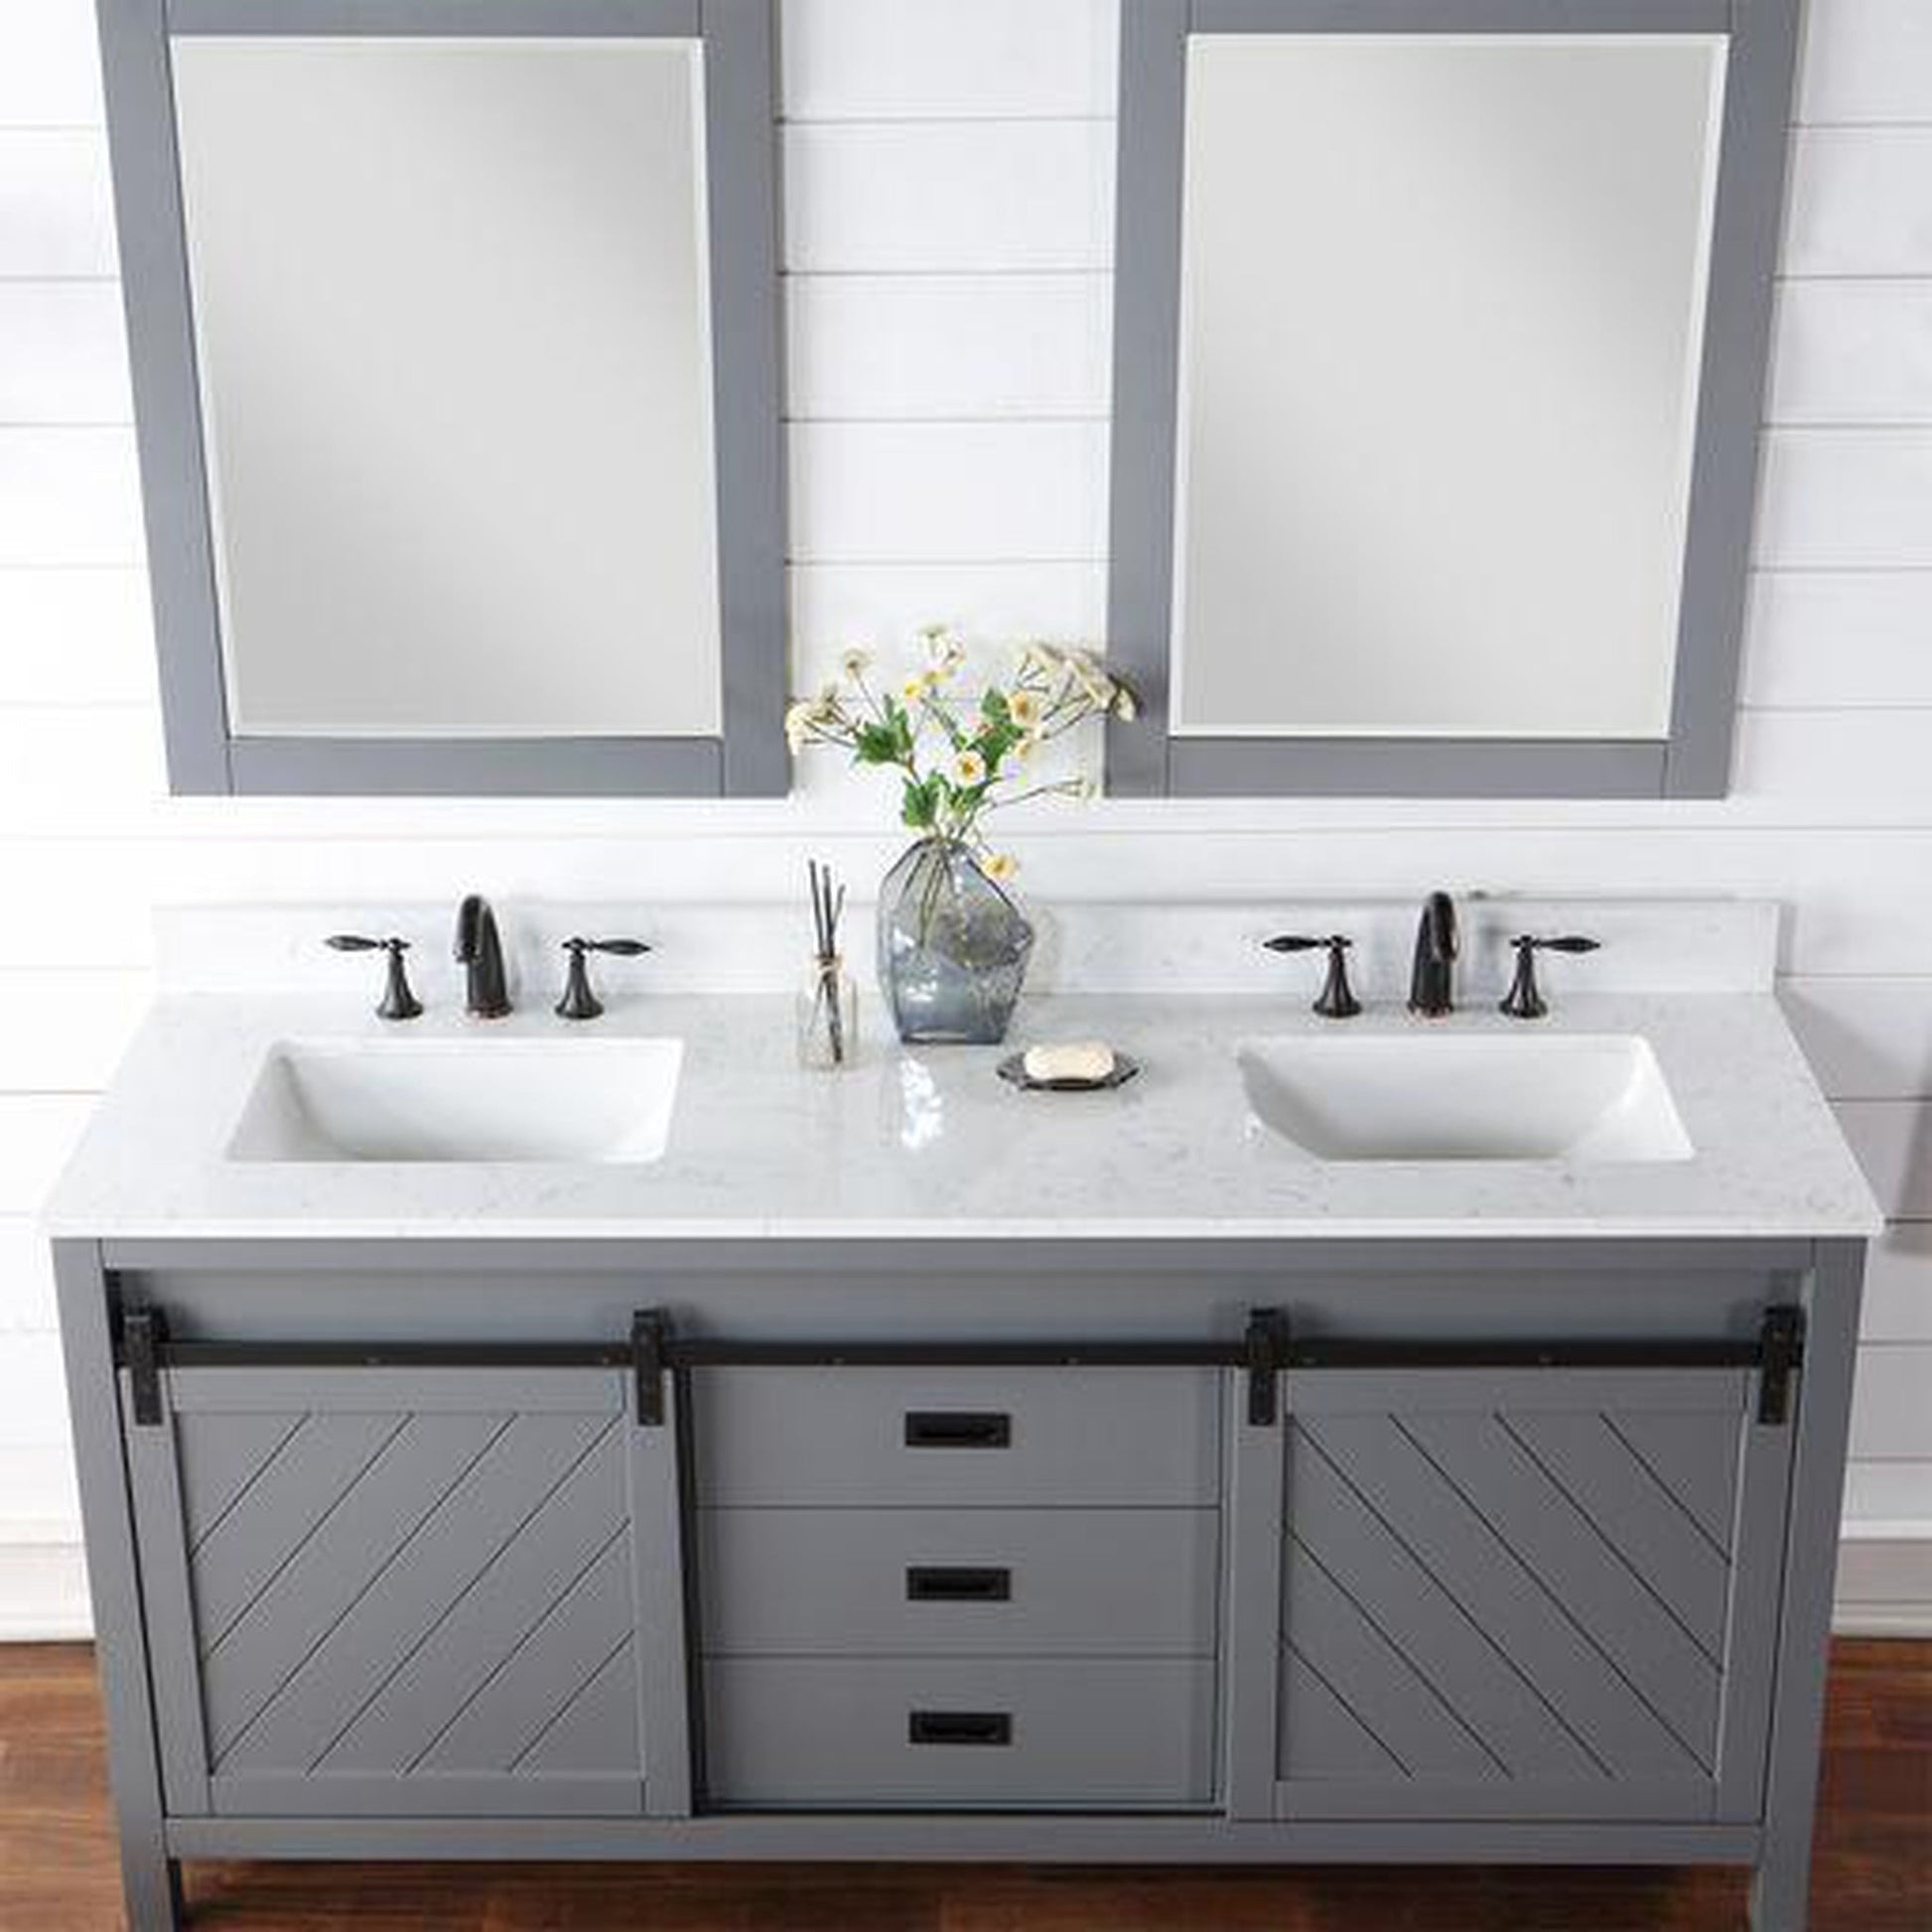 Altair Kinsley 72" Double Gray Freestanding Bathroom Vanity Set With Mirror, Aosta White Composite Stone Top, Two Rectangular Undermount Ceramic Sinks, and Overflow